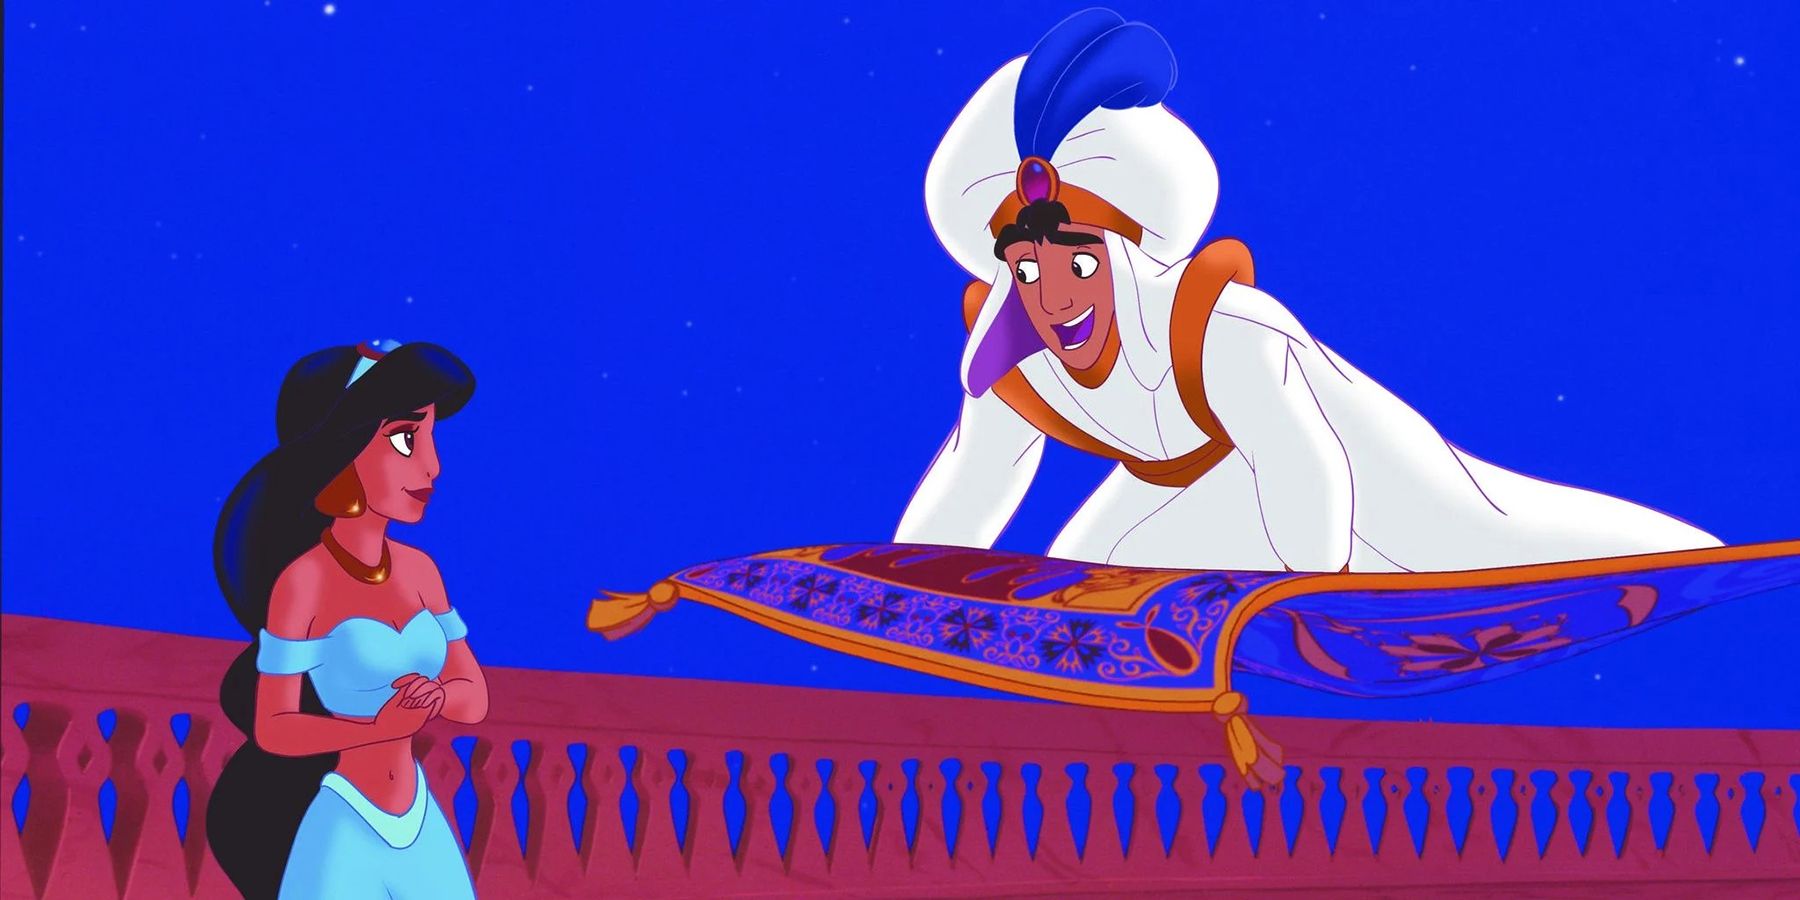 Aladdin Filmmaker Says Disney Returning To Its 2D Animated Roots